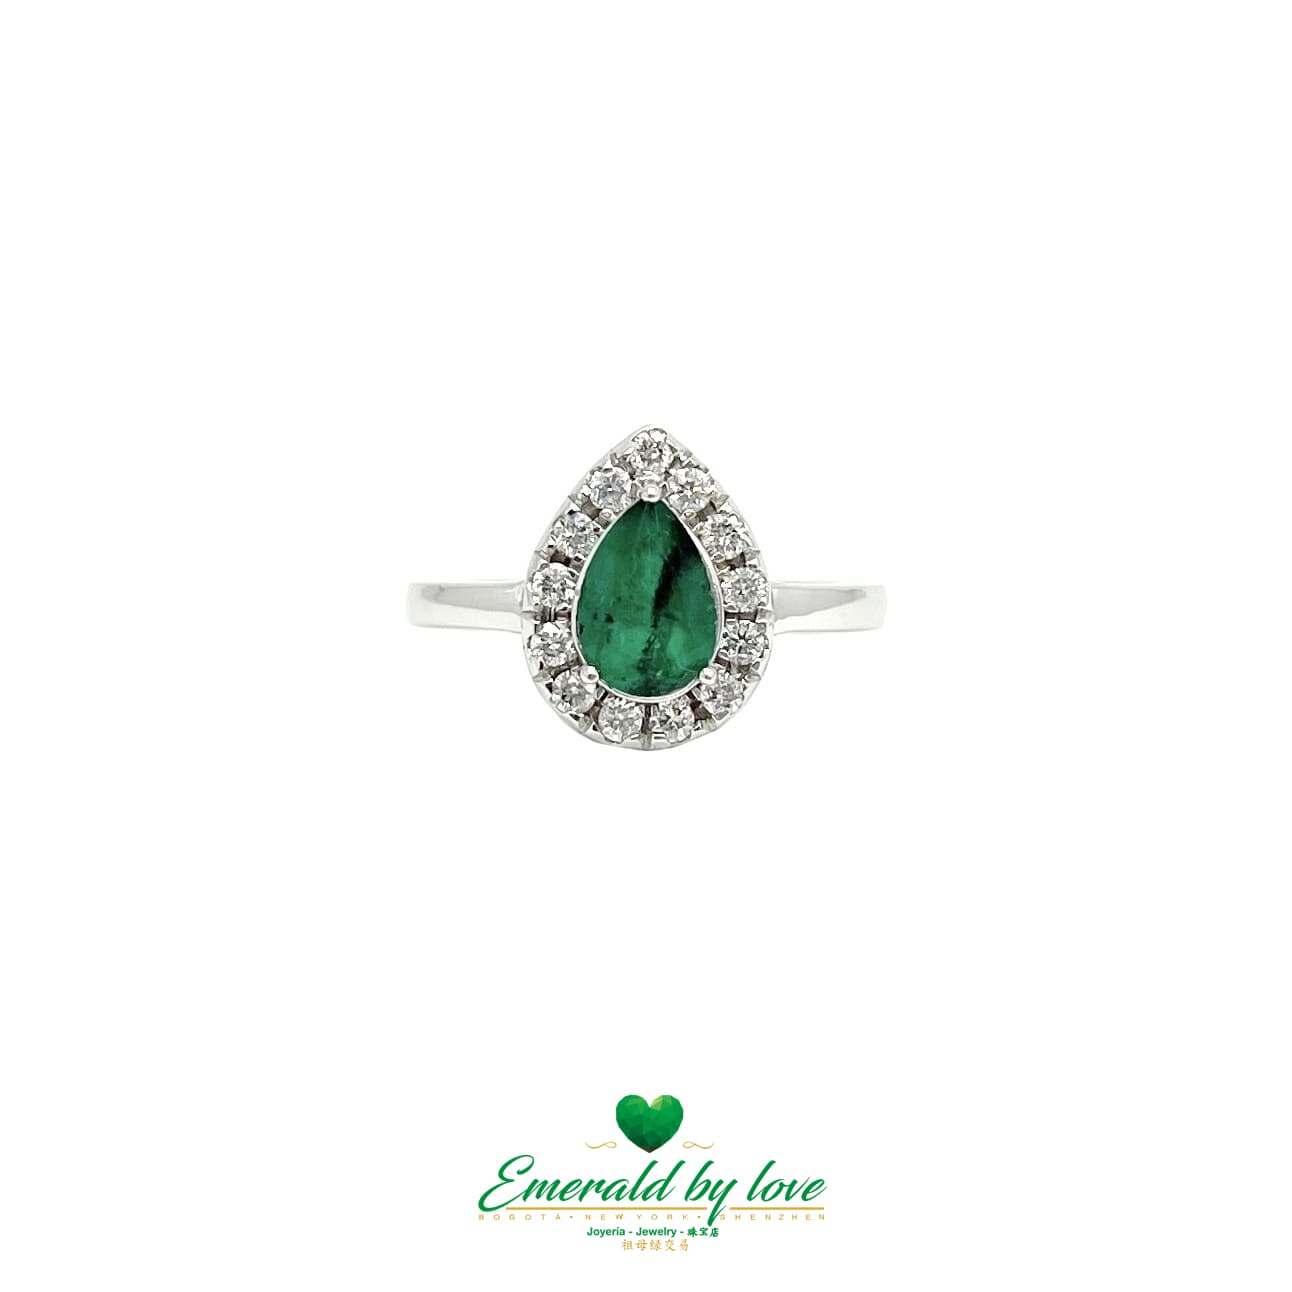 White Gold Tear-Shaped Marquise Emerald Ring with Diamond Halo